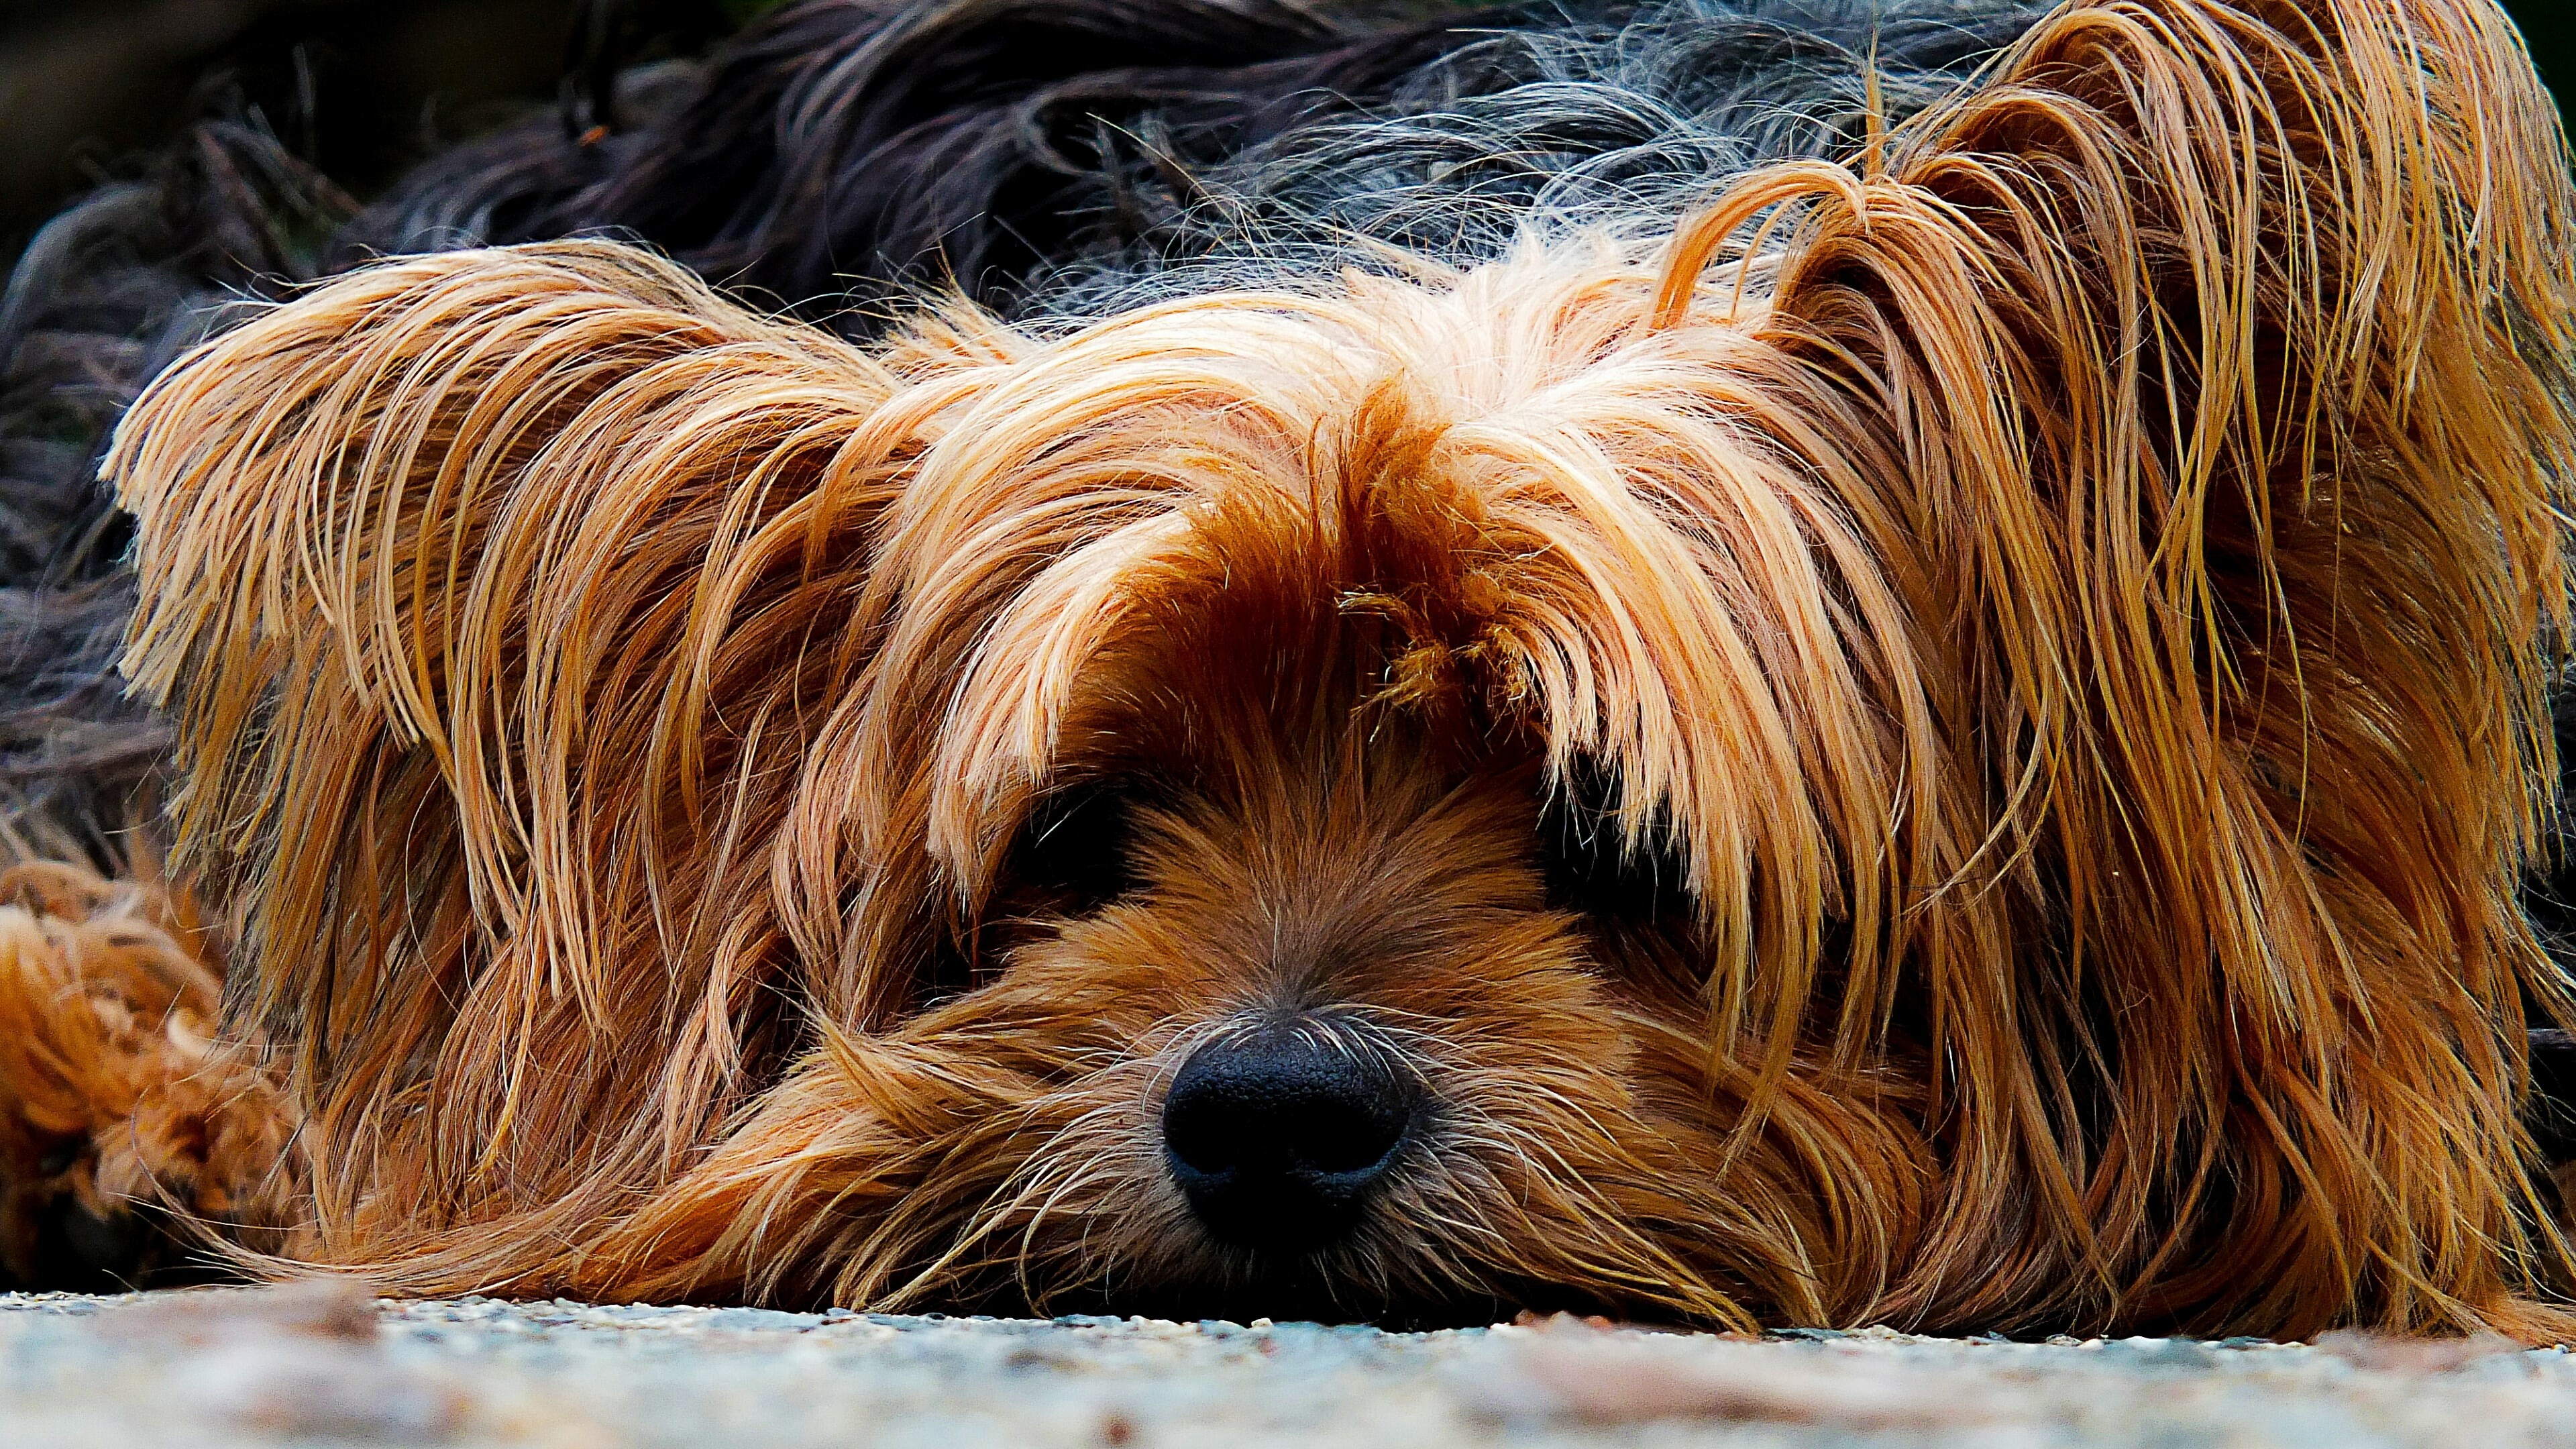 Yorkshire Terrier: The breed developed during the 19th century in Yorkshire, England. 3840x2160 4K Wallpaper.